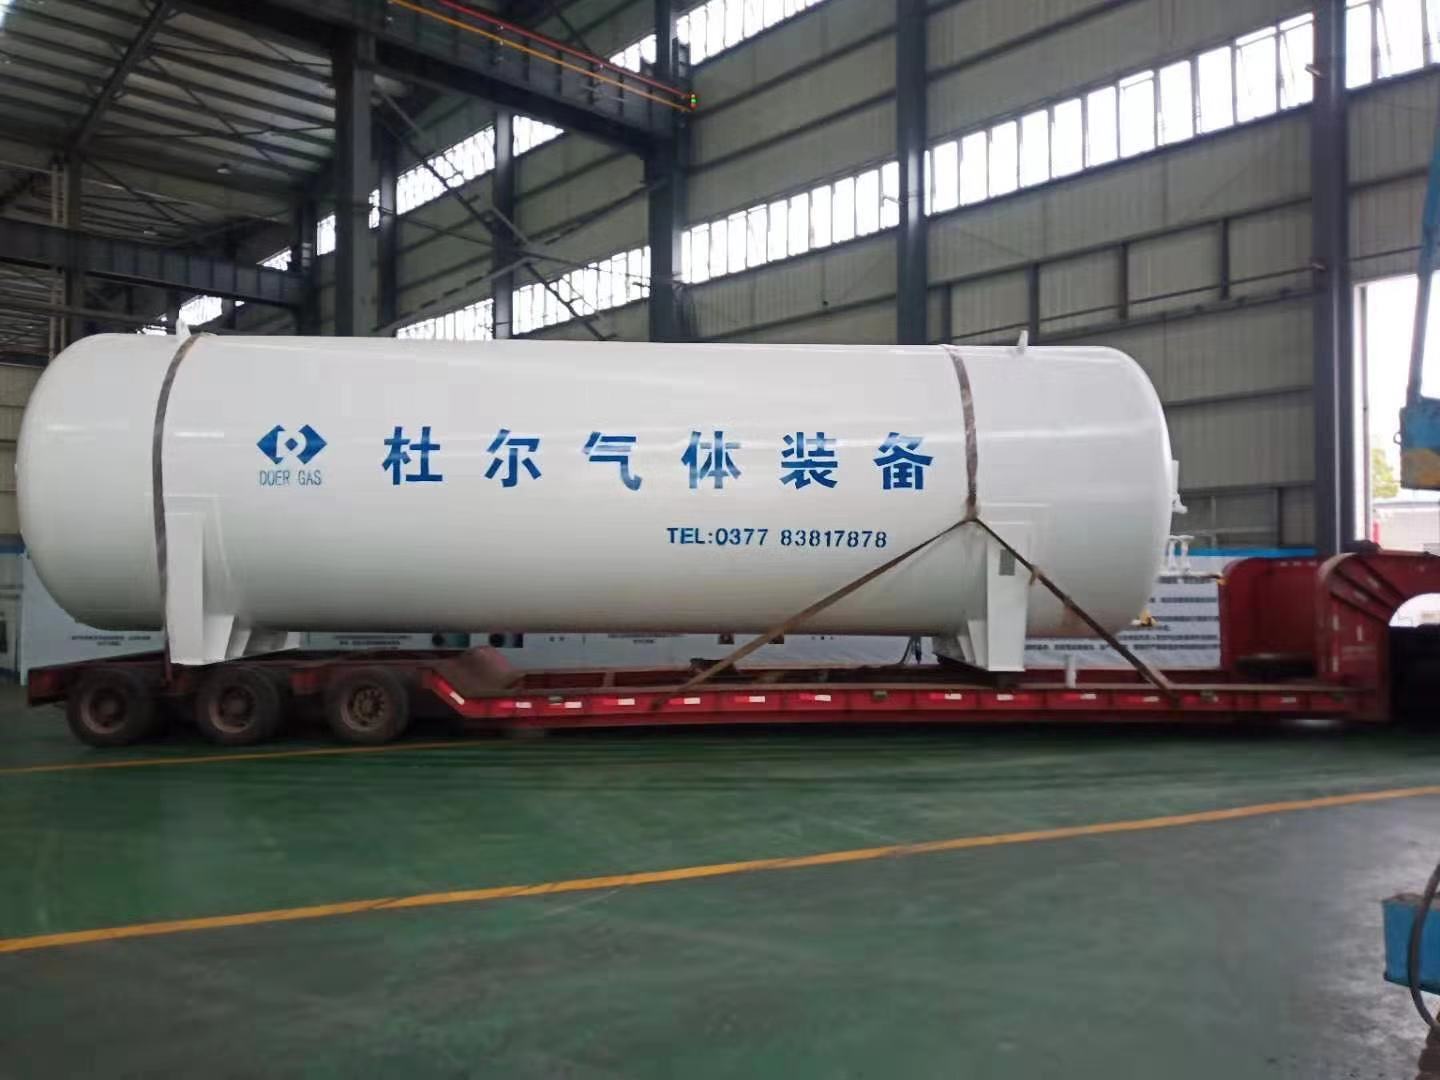 215、Process flow of low-temperature LNG storage tank - Doer Equipment